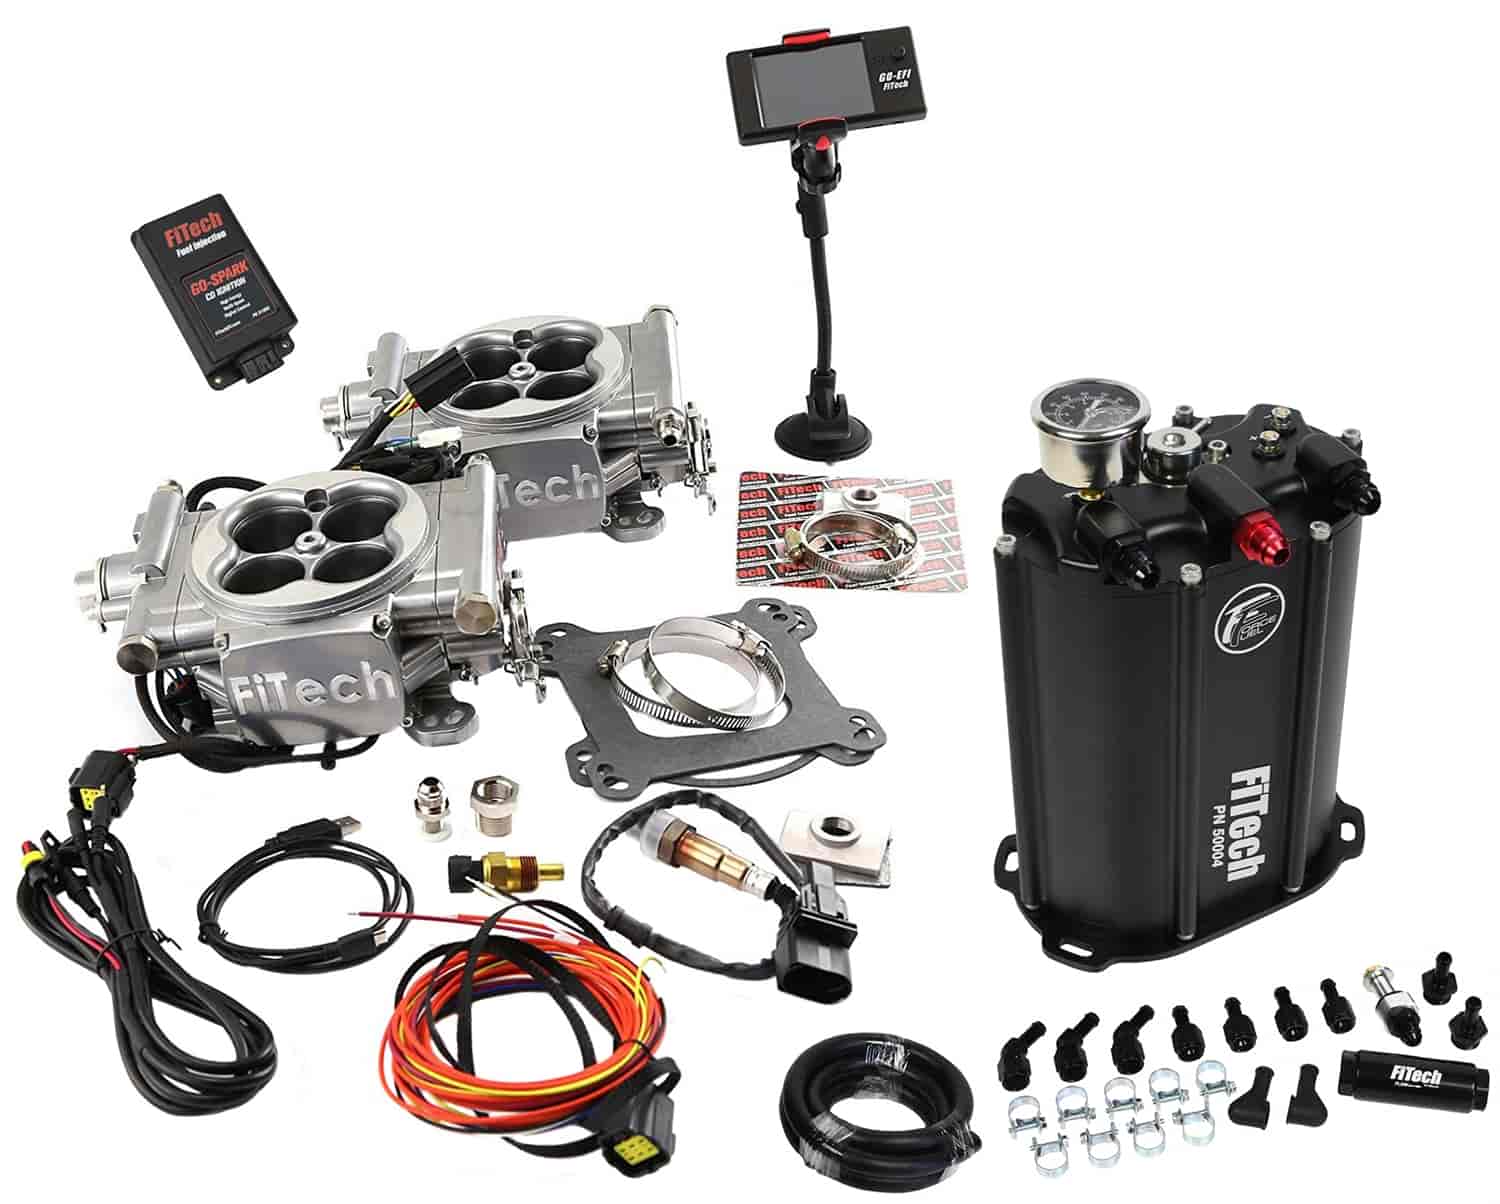 Go EFI 2x4 625 HP Dual Quad Throttle Body Fuel Injection Master Kit [With Force Fuel System & CDI Box] Bright Aluminum